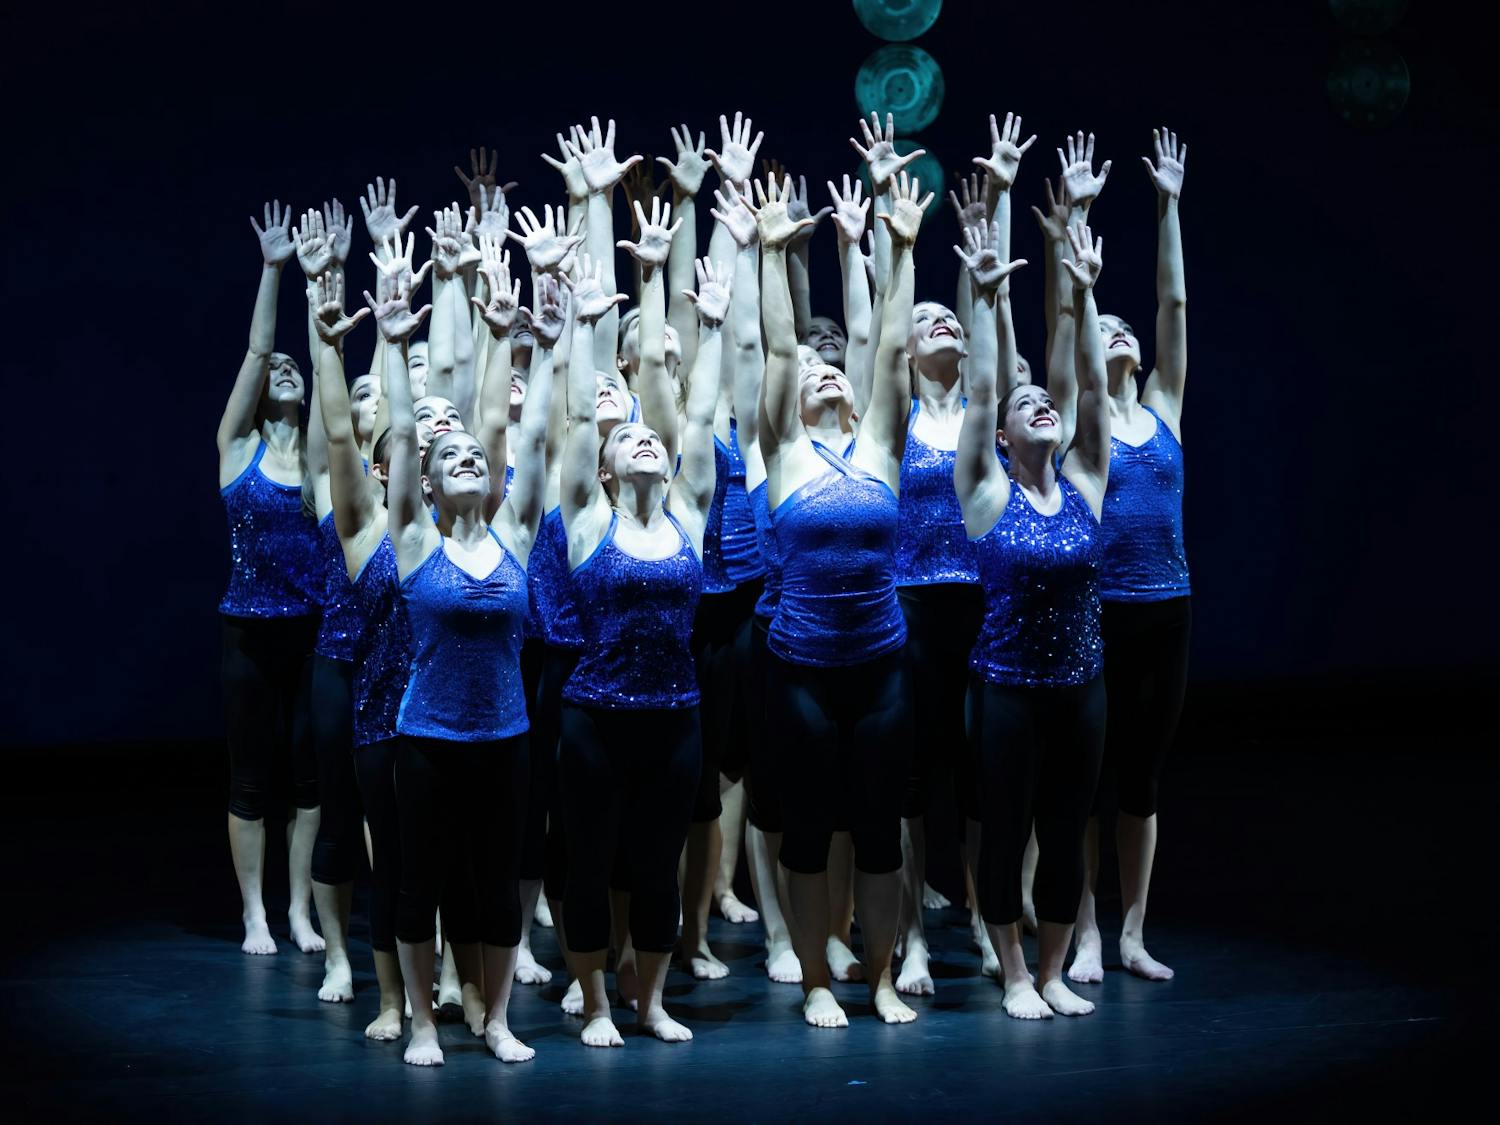 The Zodiac Dance Company performed at UB’s Center for the Arts this past Friday.